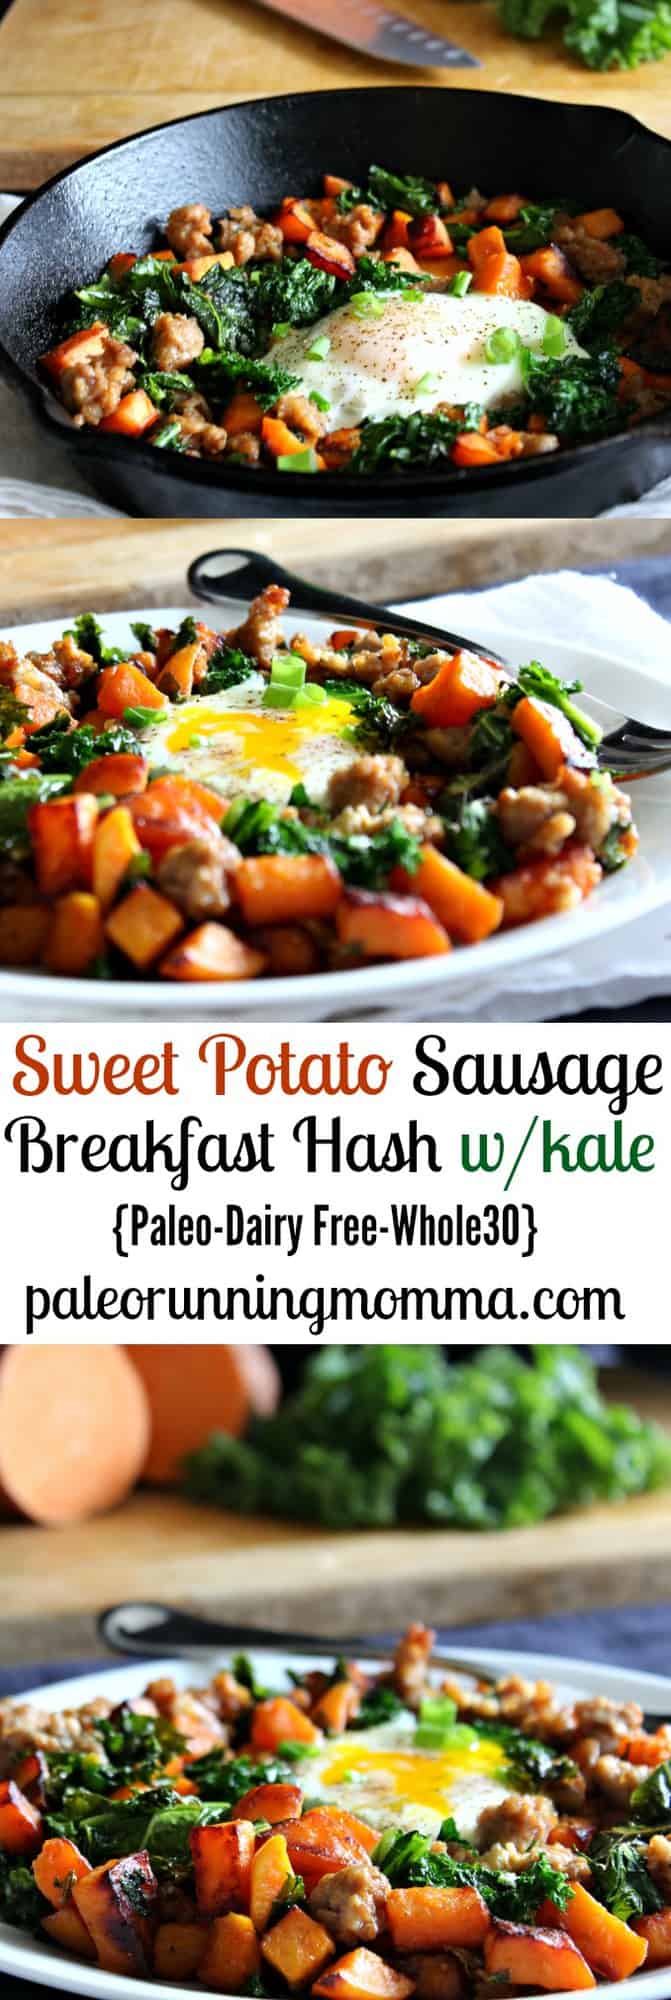 Easy and healthy Sweet Potato Sausage Breakfast Hash with Kale - Paleo, dairy free, whole30 and sugar detox friendly! Simple and delicious, great for any meal